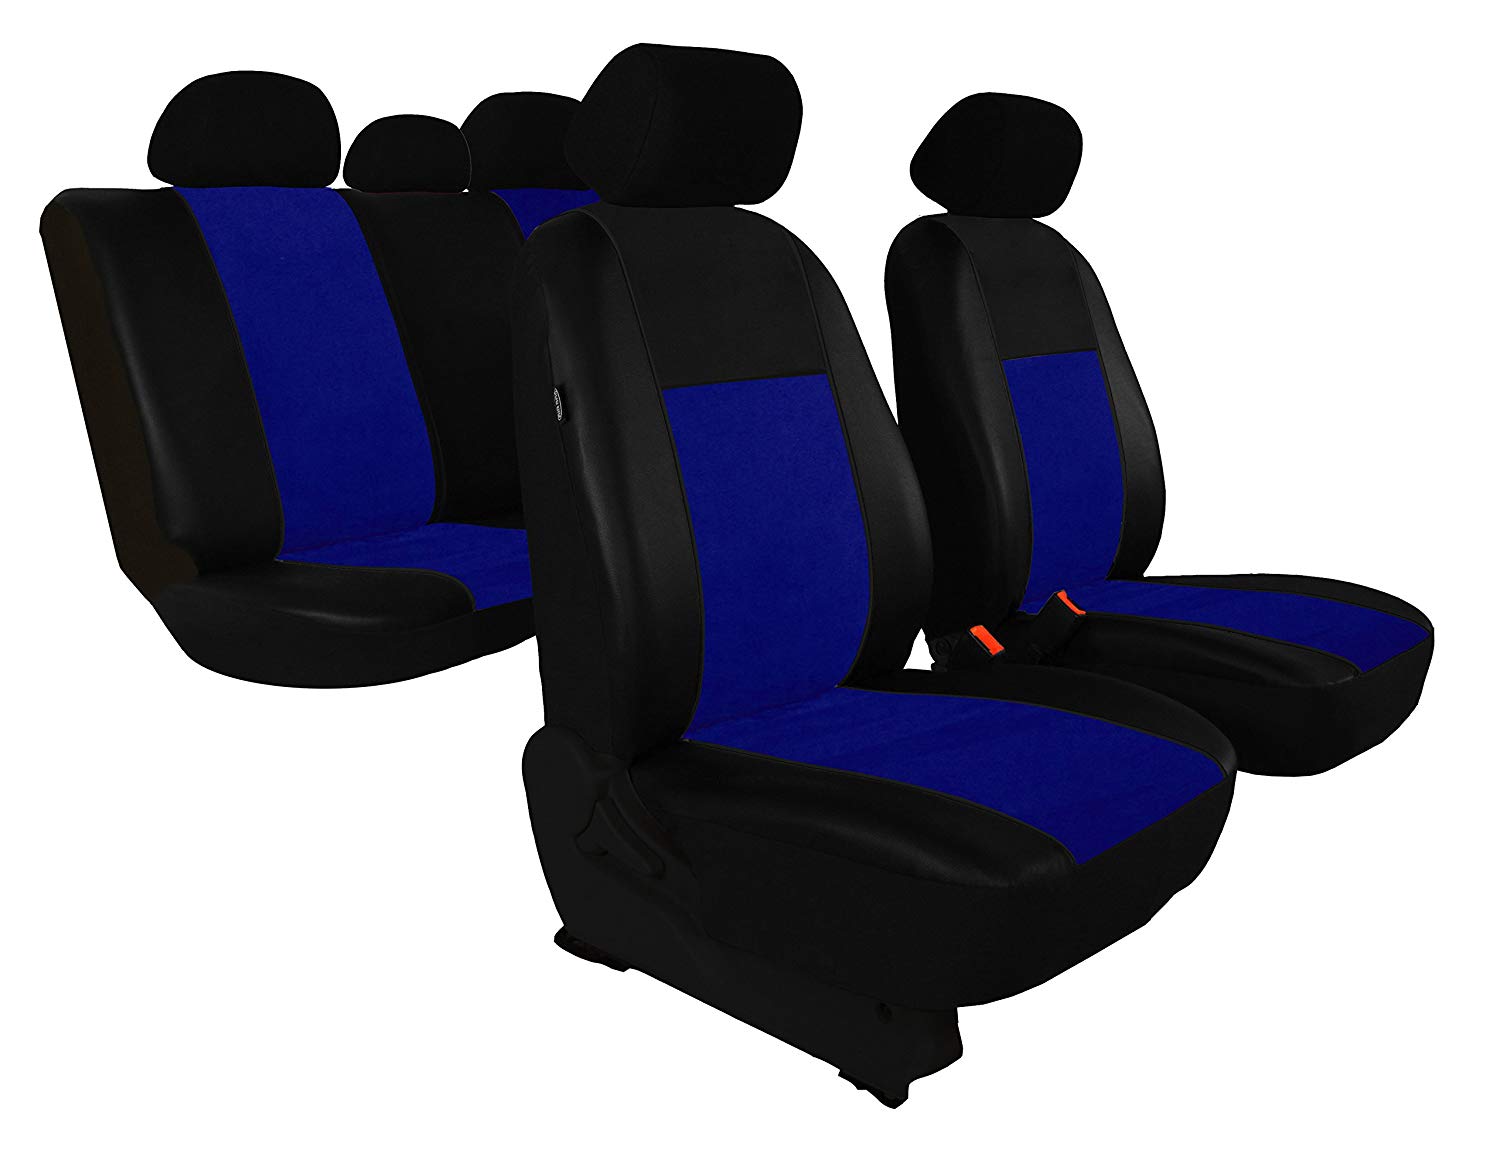 Pok-Tuning best quality seat covers for Sandero II from 2012 onwards in this offer Blue Unico (available in 7 colours).